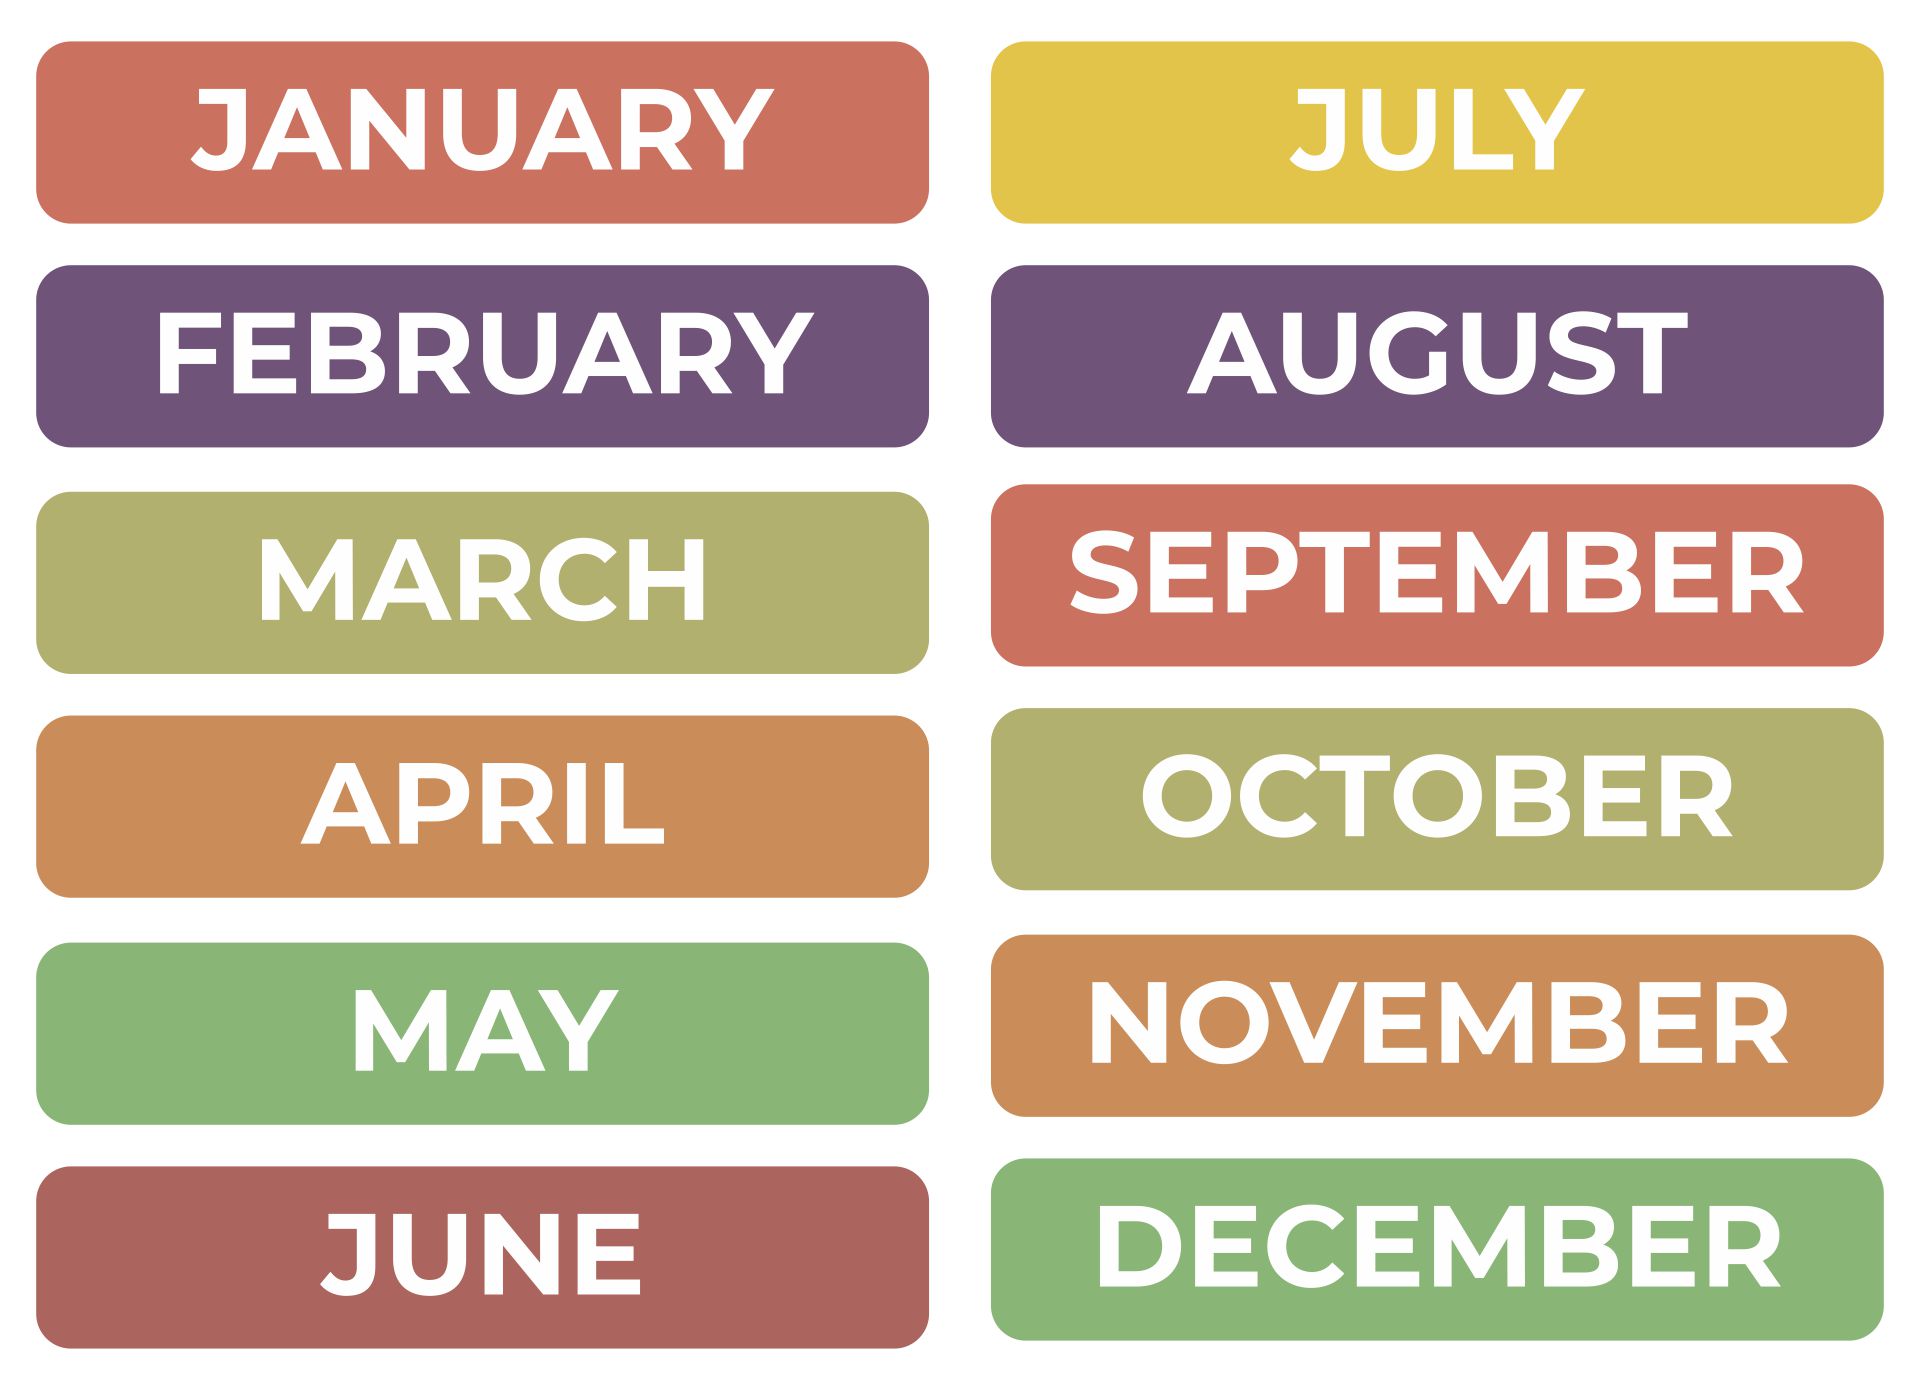 6-best-images-of-free-printable-months-of-the-year-chart-months-of-year-printable-chart